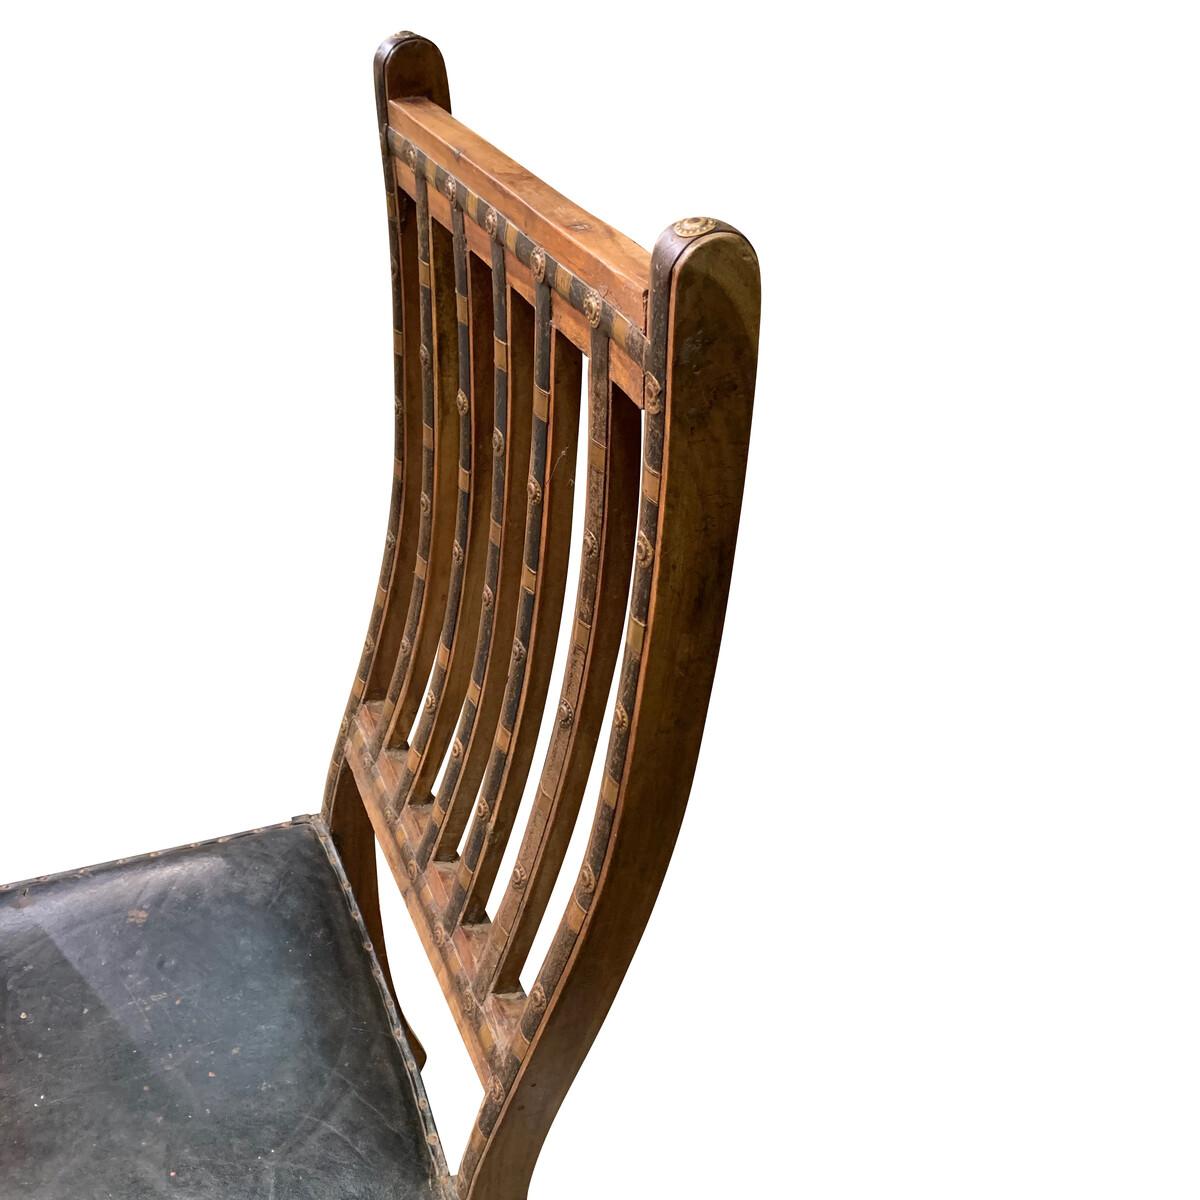 19th century Indian single chair with decorative iron bands and bronze studs
along the back seat and legs.
The spindled back is curved.
The black leather seat is original to the chair.

      